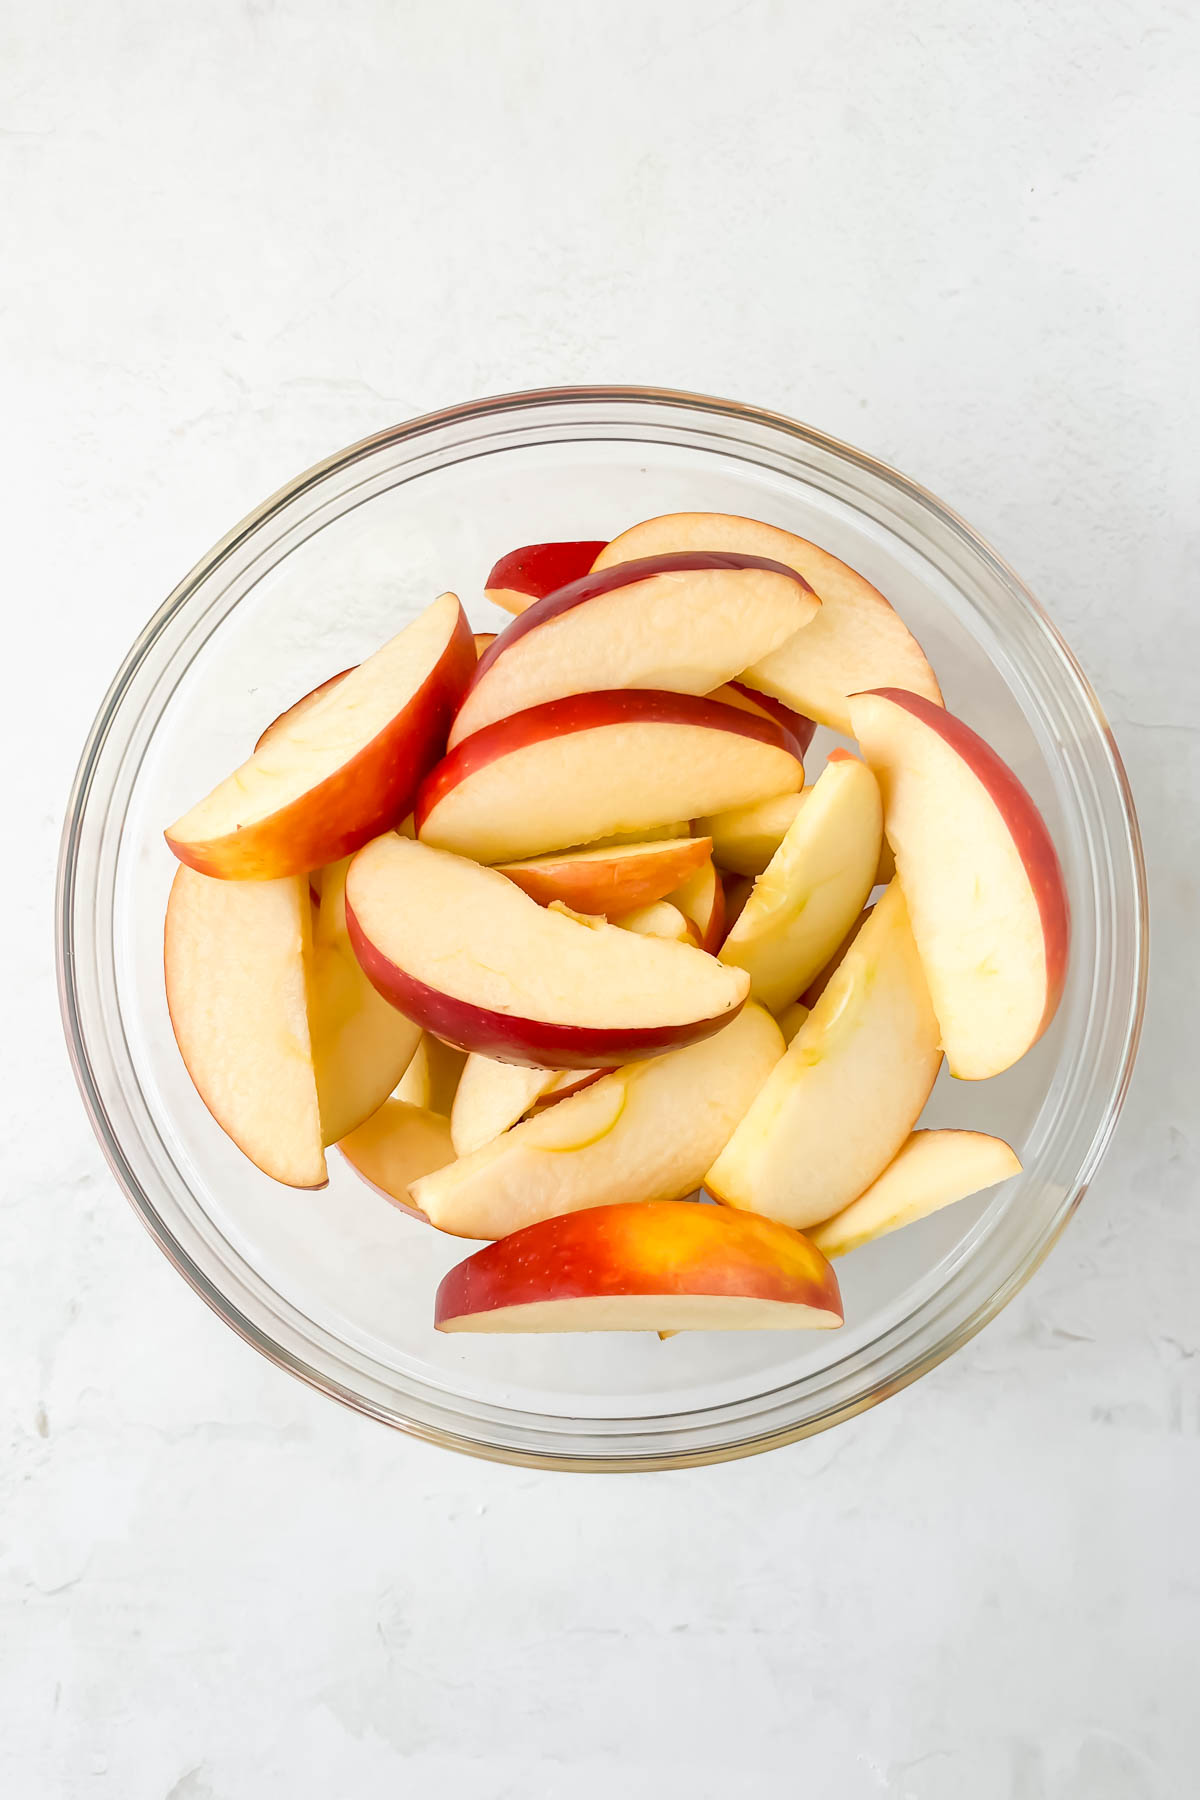 diced apples in a glass bowl on a white background. 